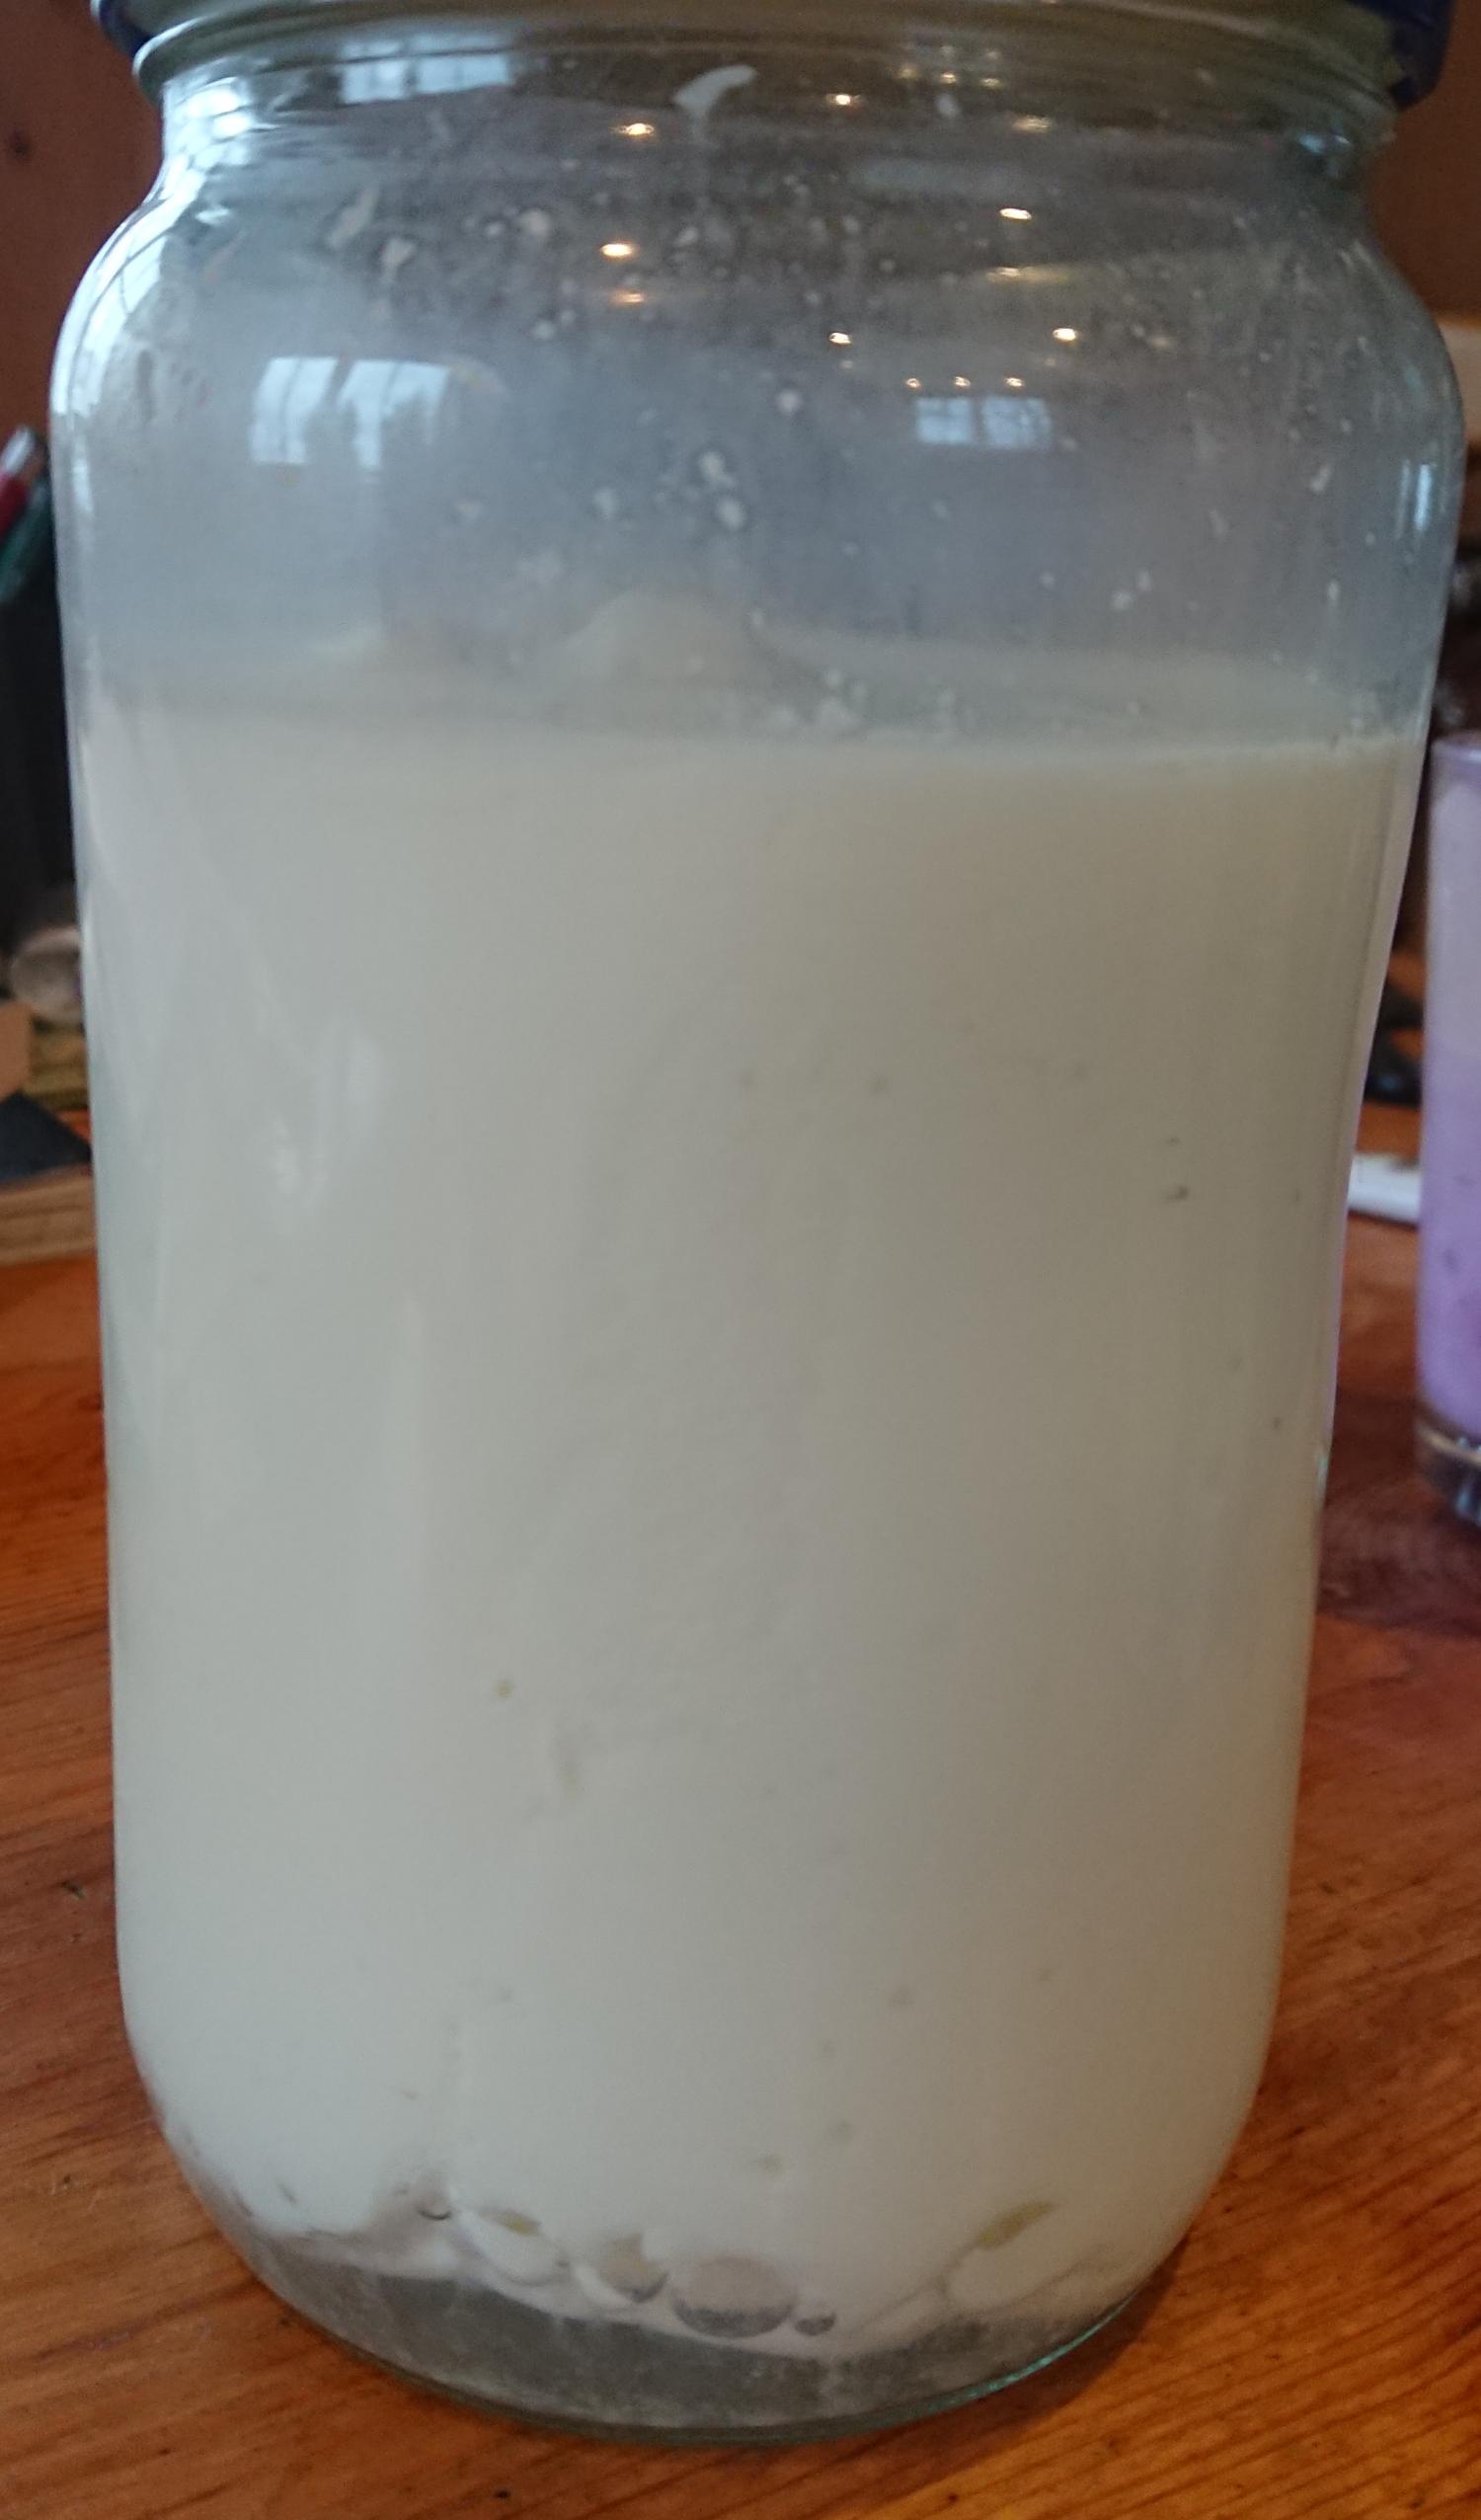 A batch of kefir in good condition